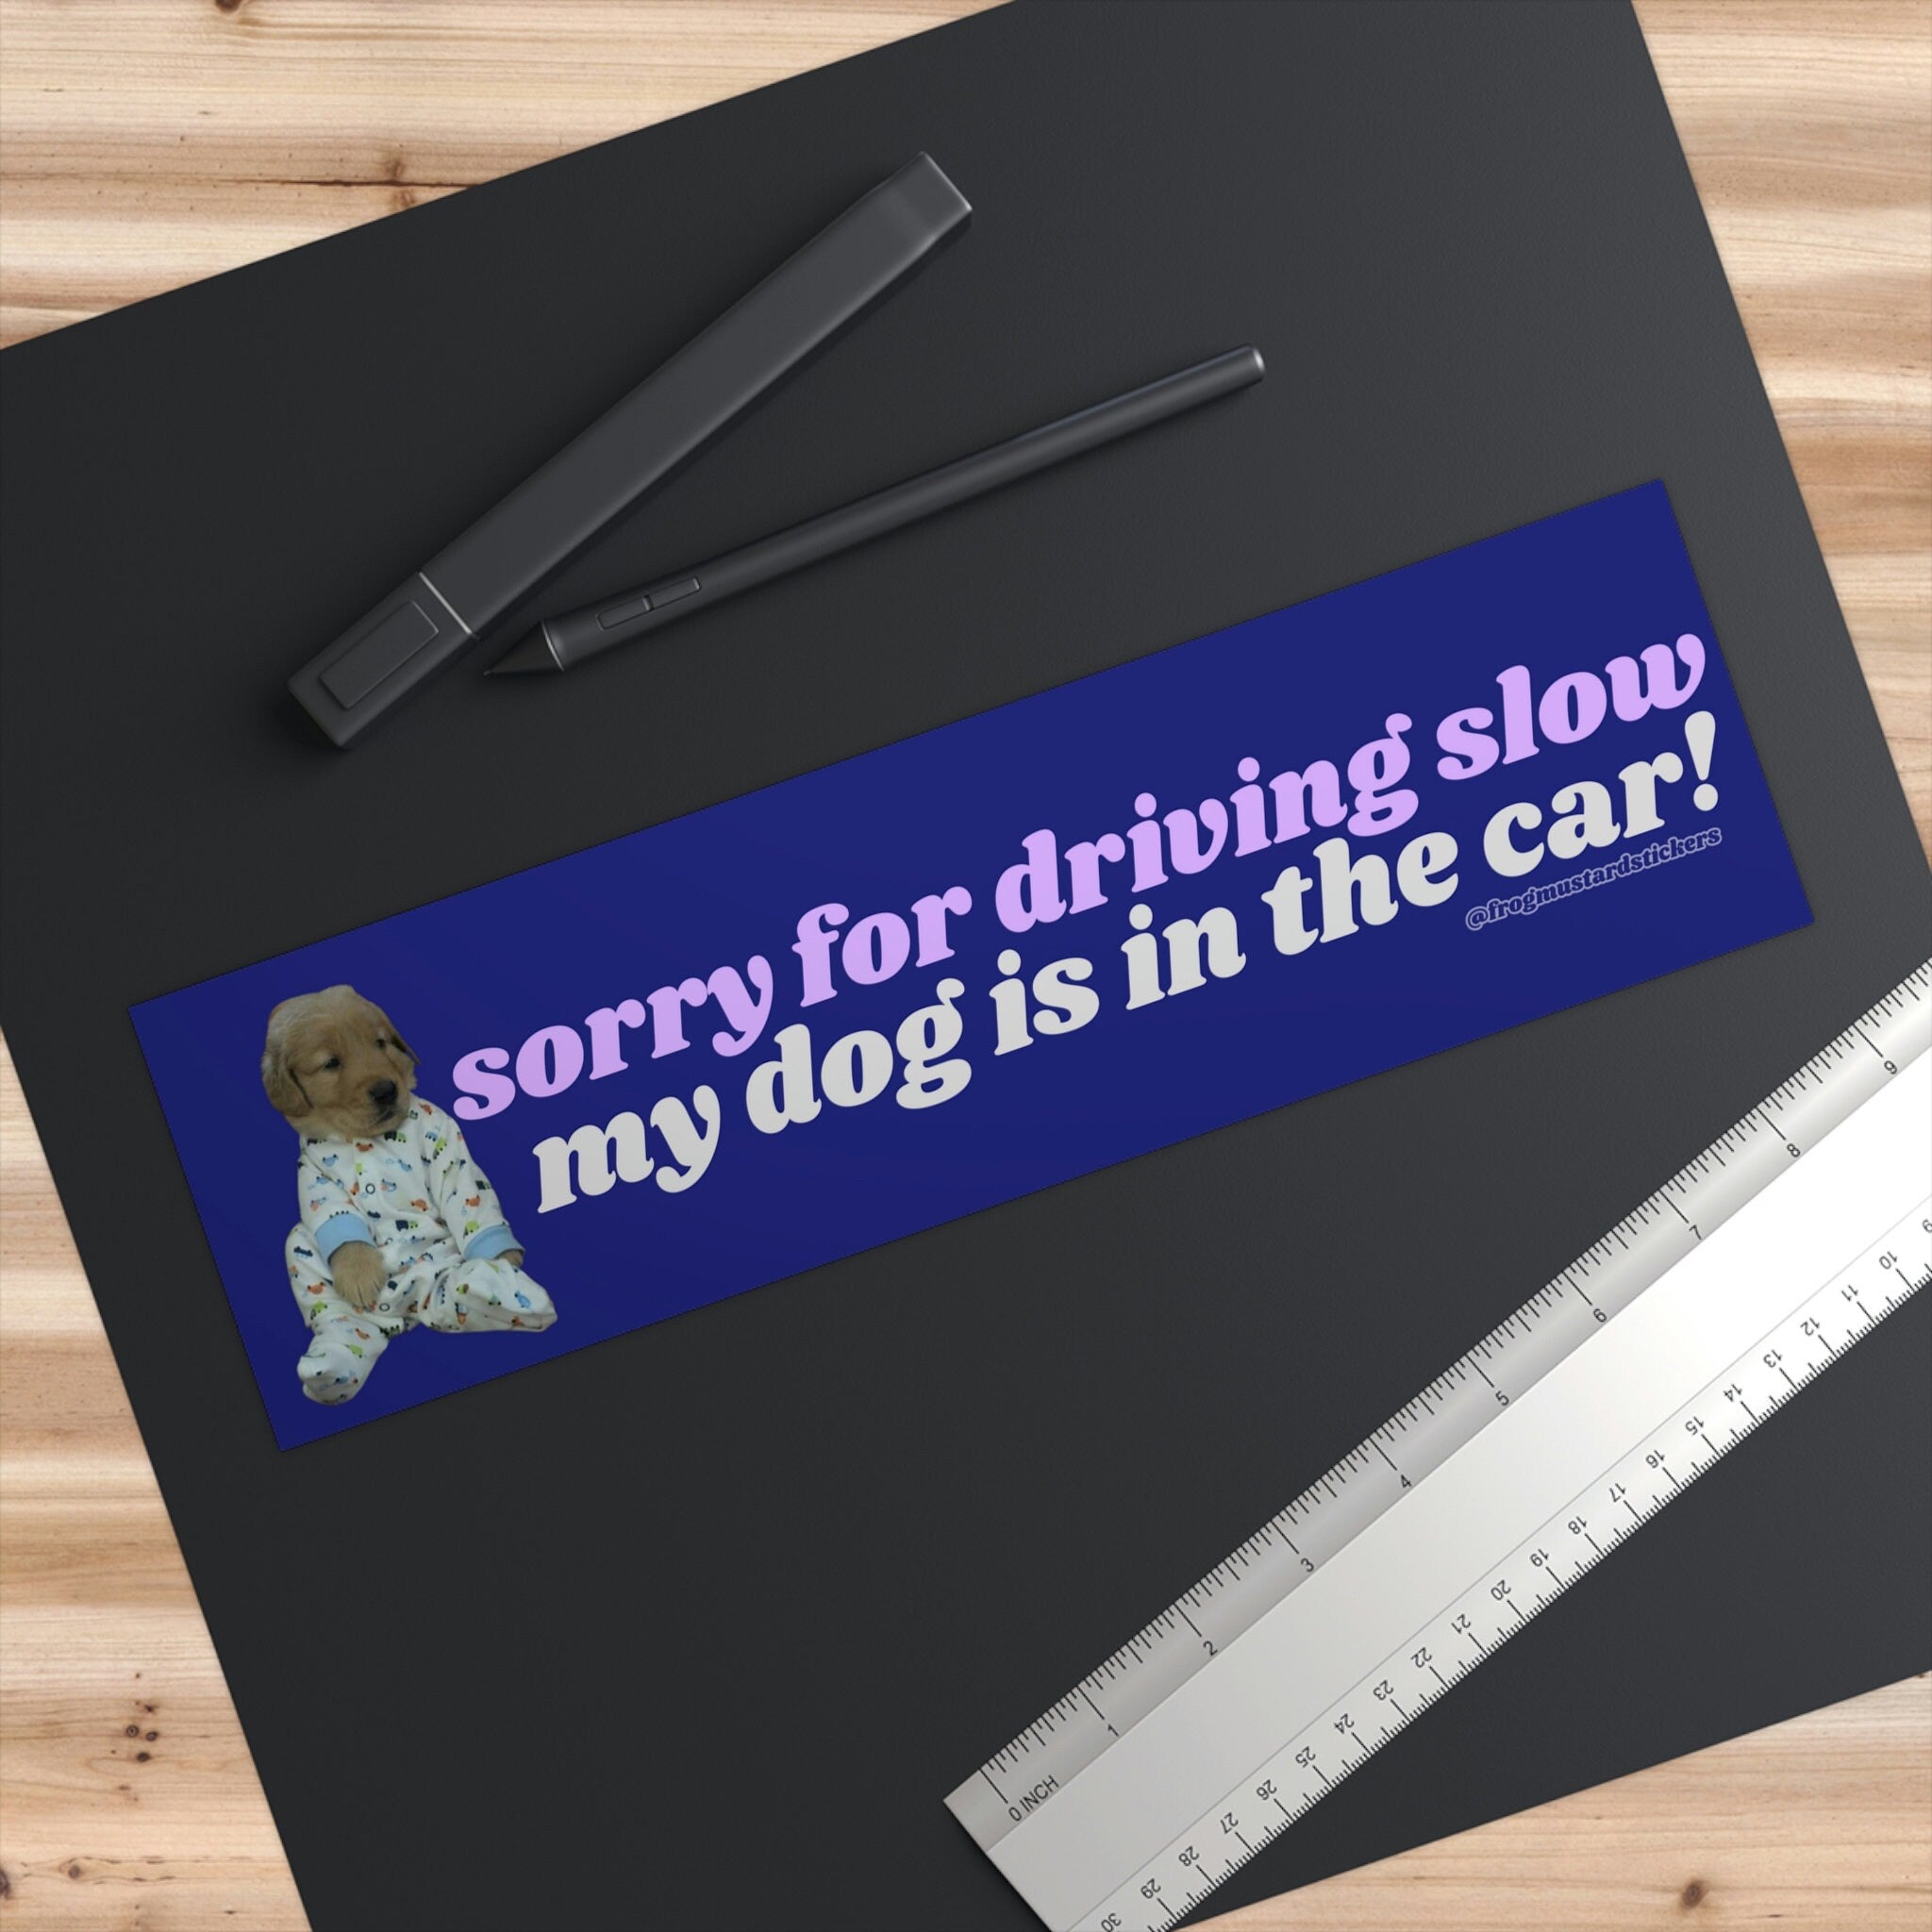 Sorry for driving slow - my dog is in the car! Bumper Sticker or Magnet | Funny Sticker | Satire | Gen Z Humor | 8.5" x 2.5"